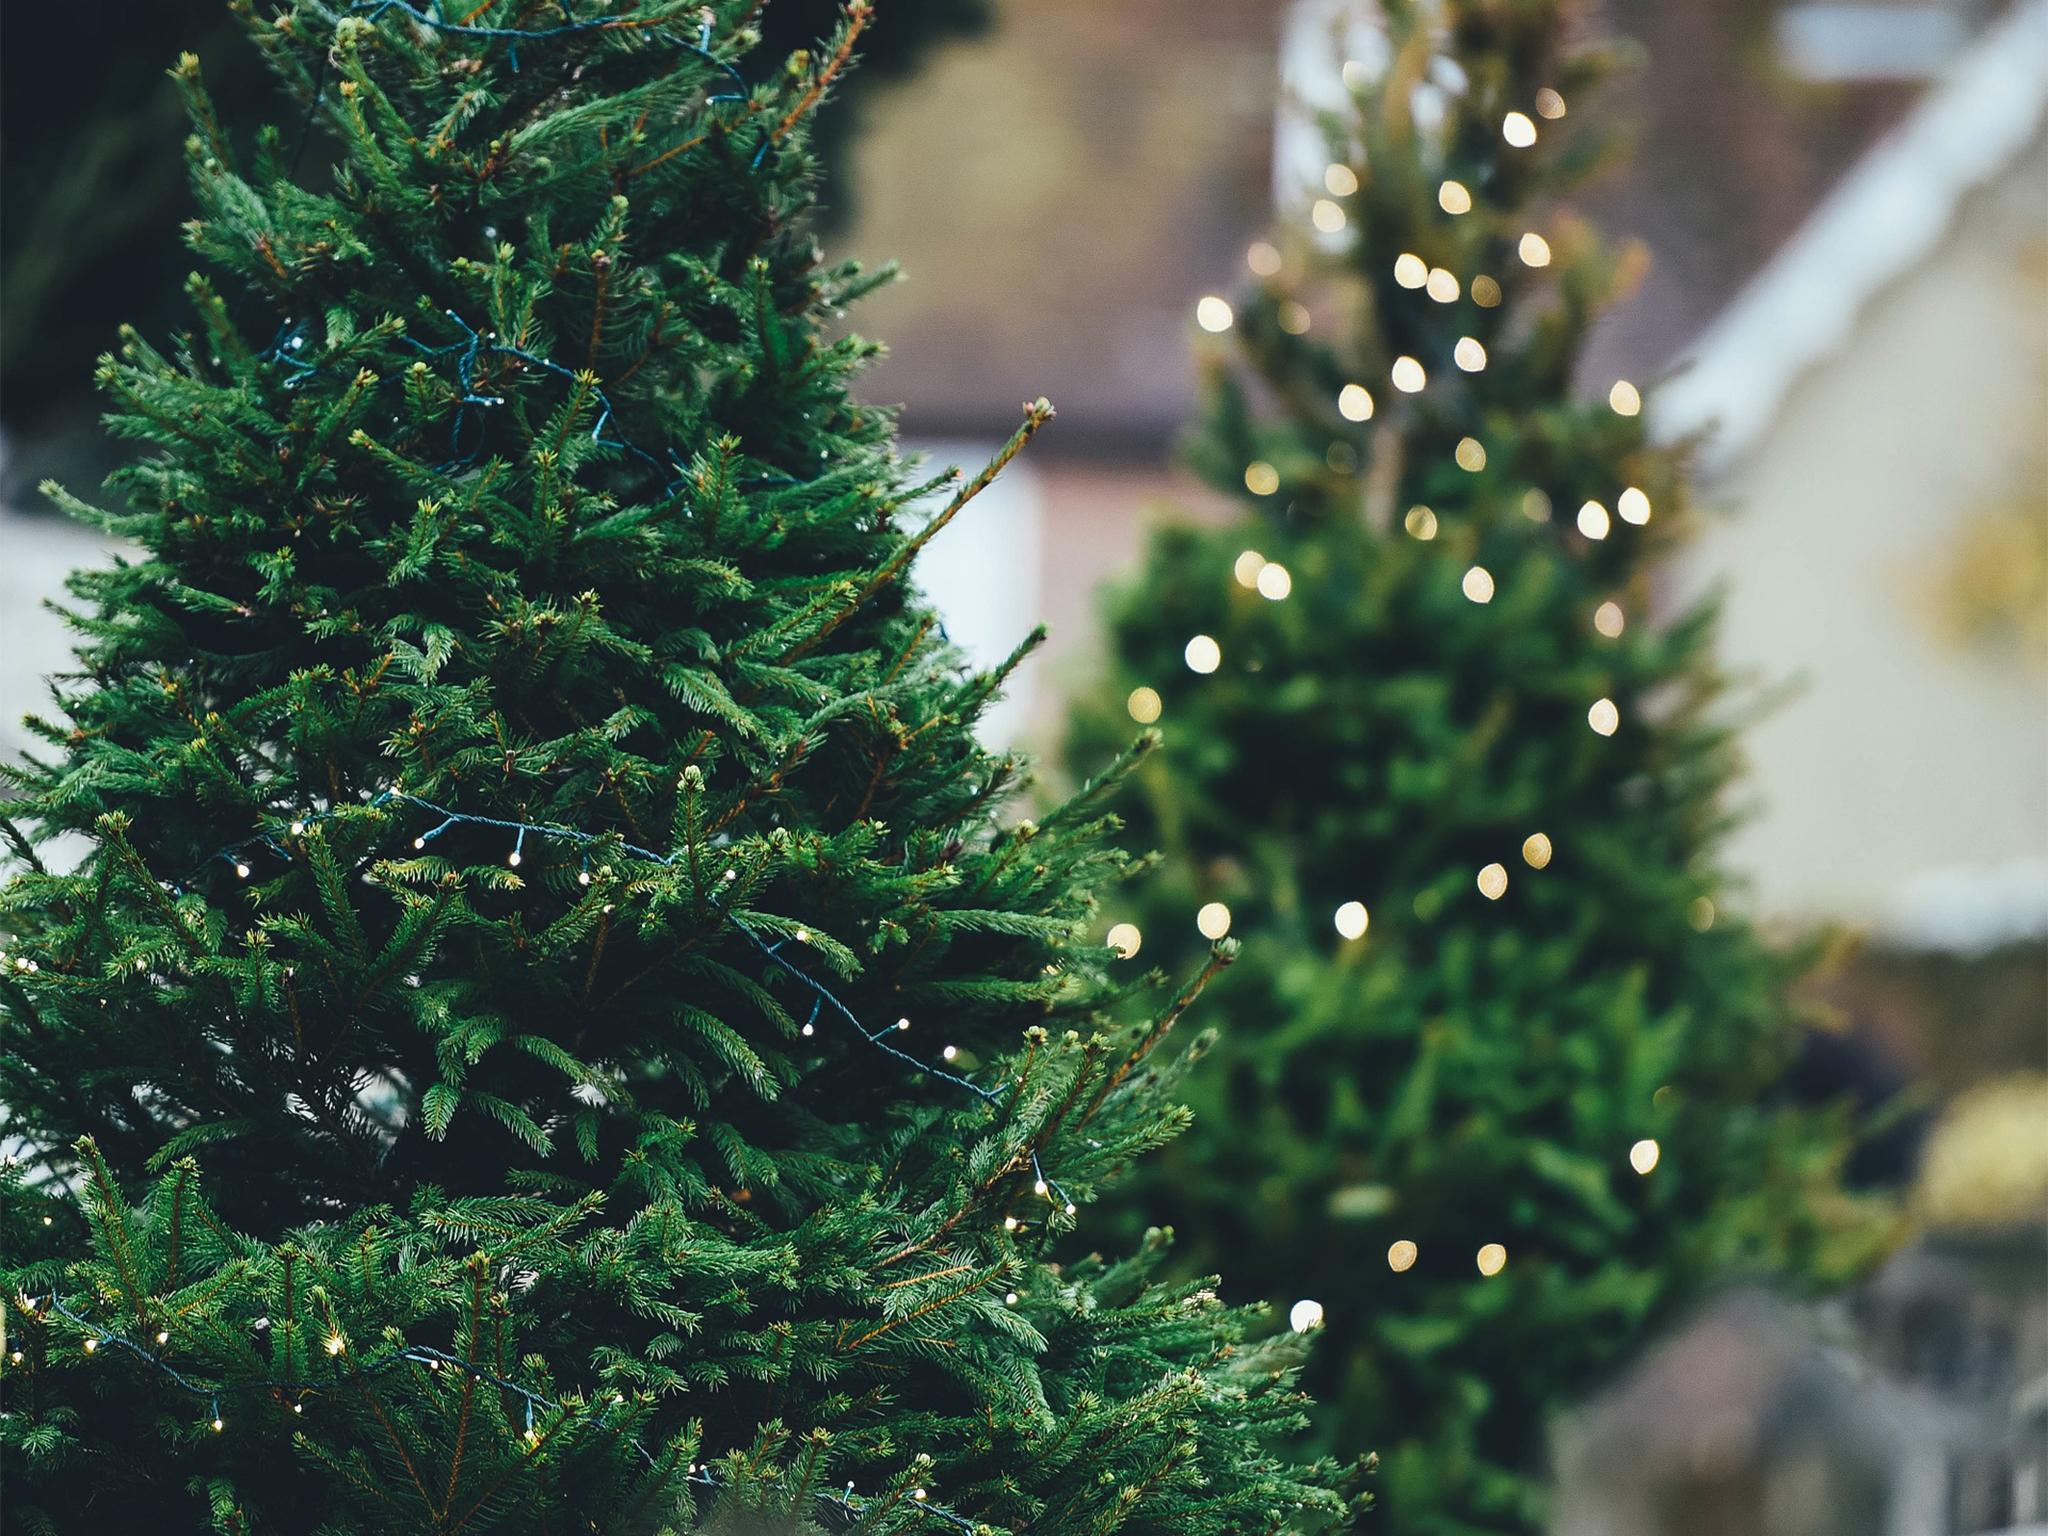 Where to buy Christmas trees in Sydney